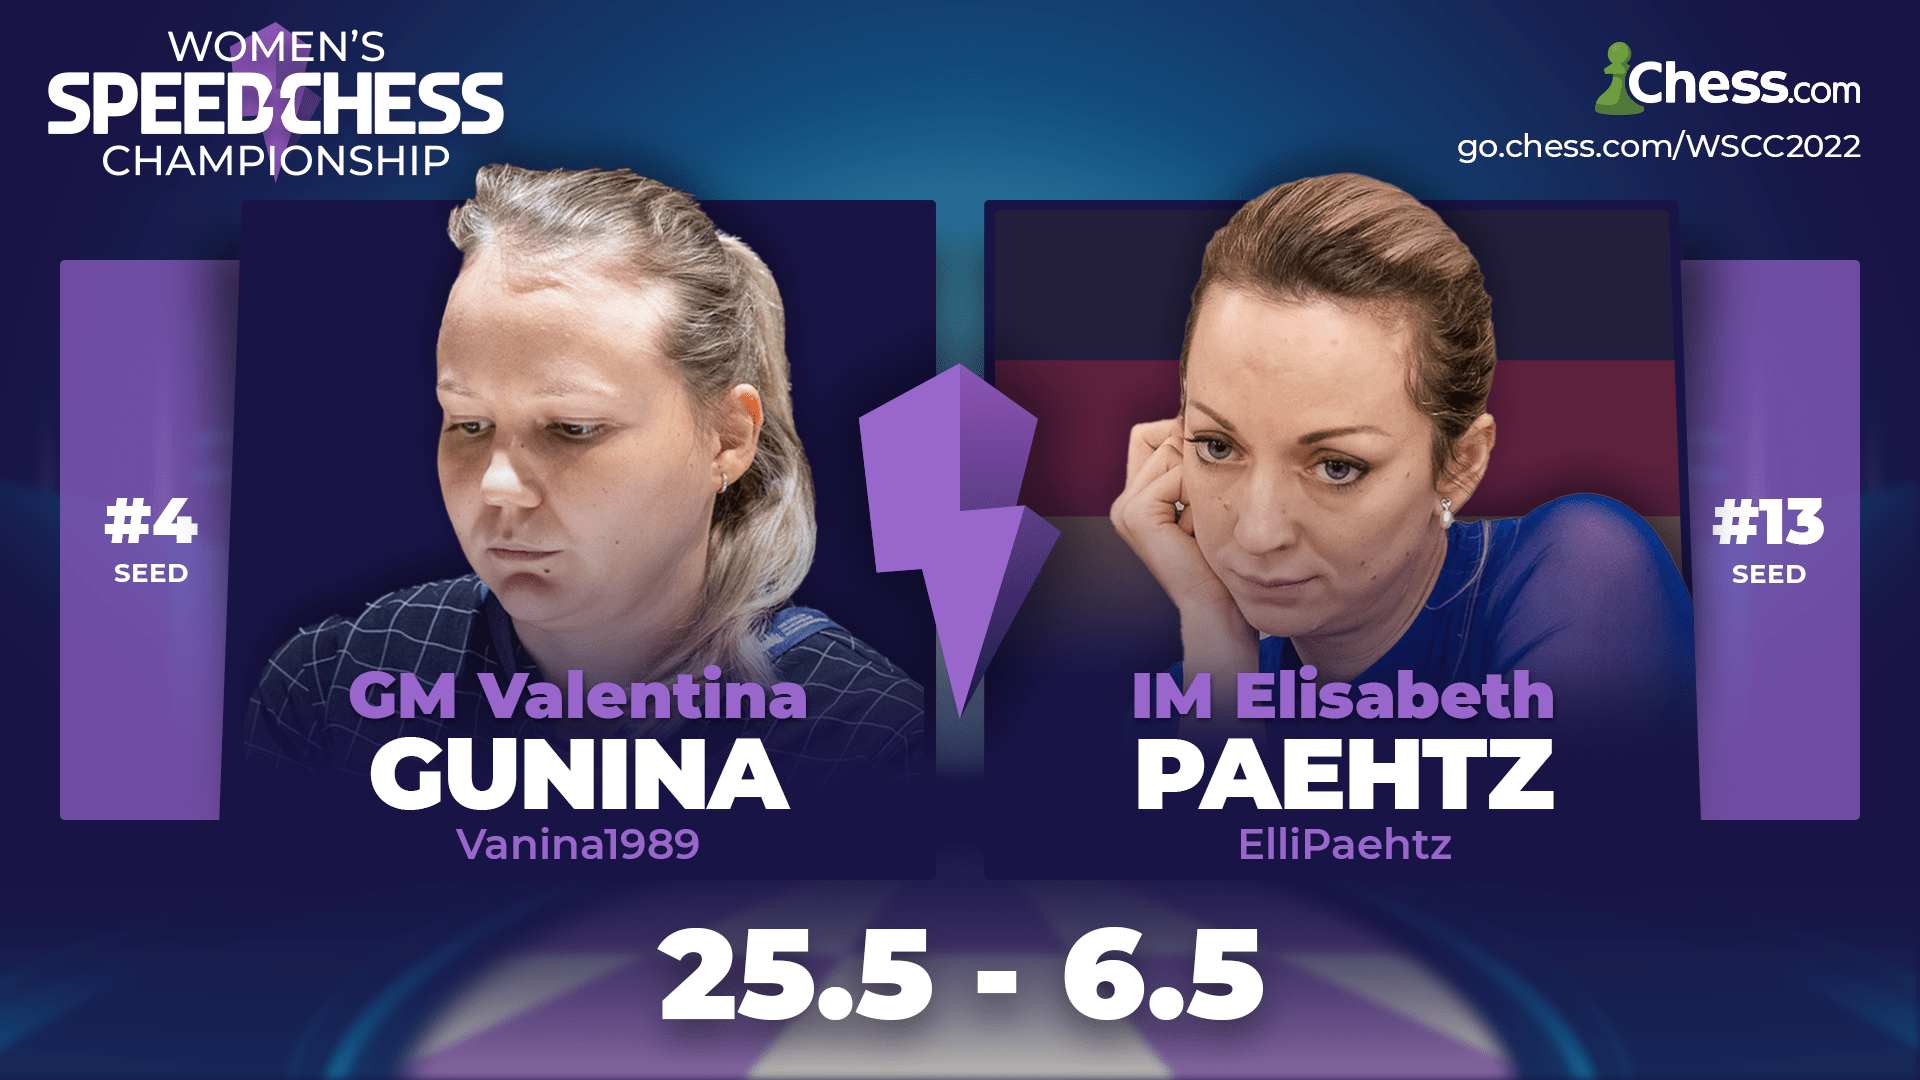 Gunina Overtakes Paehtz: ‘When Valentina is on fire, she is just merciless.’